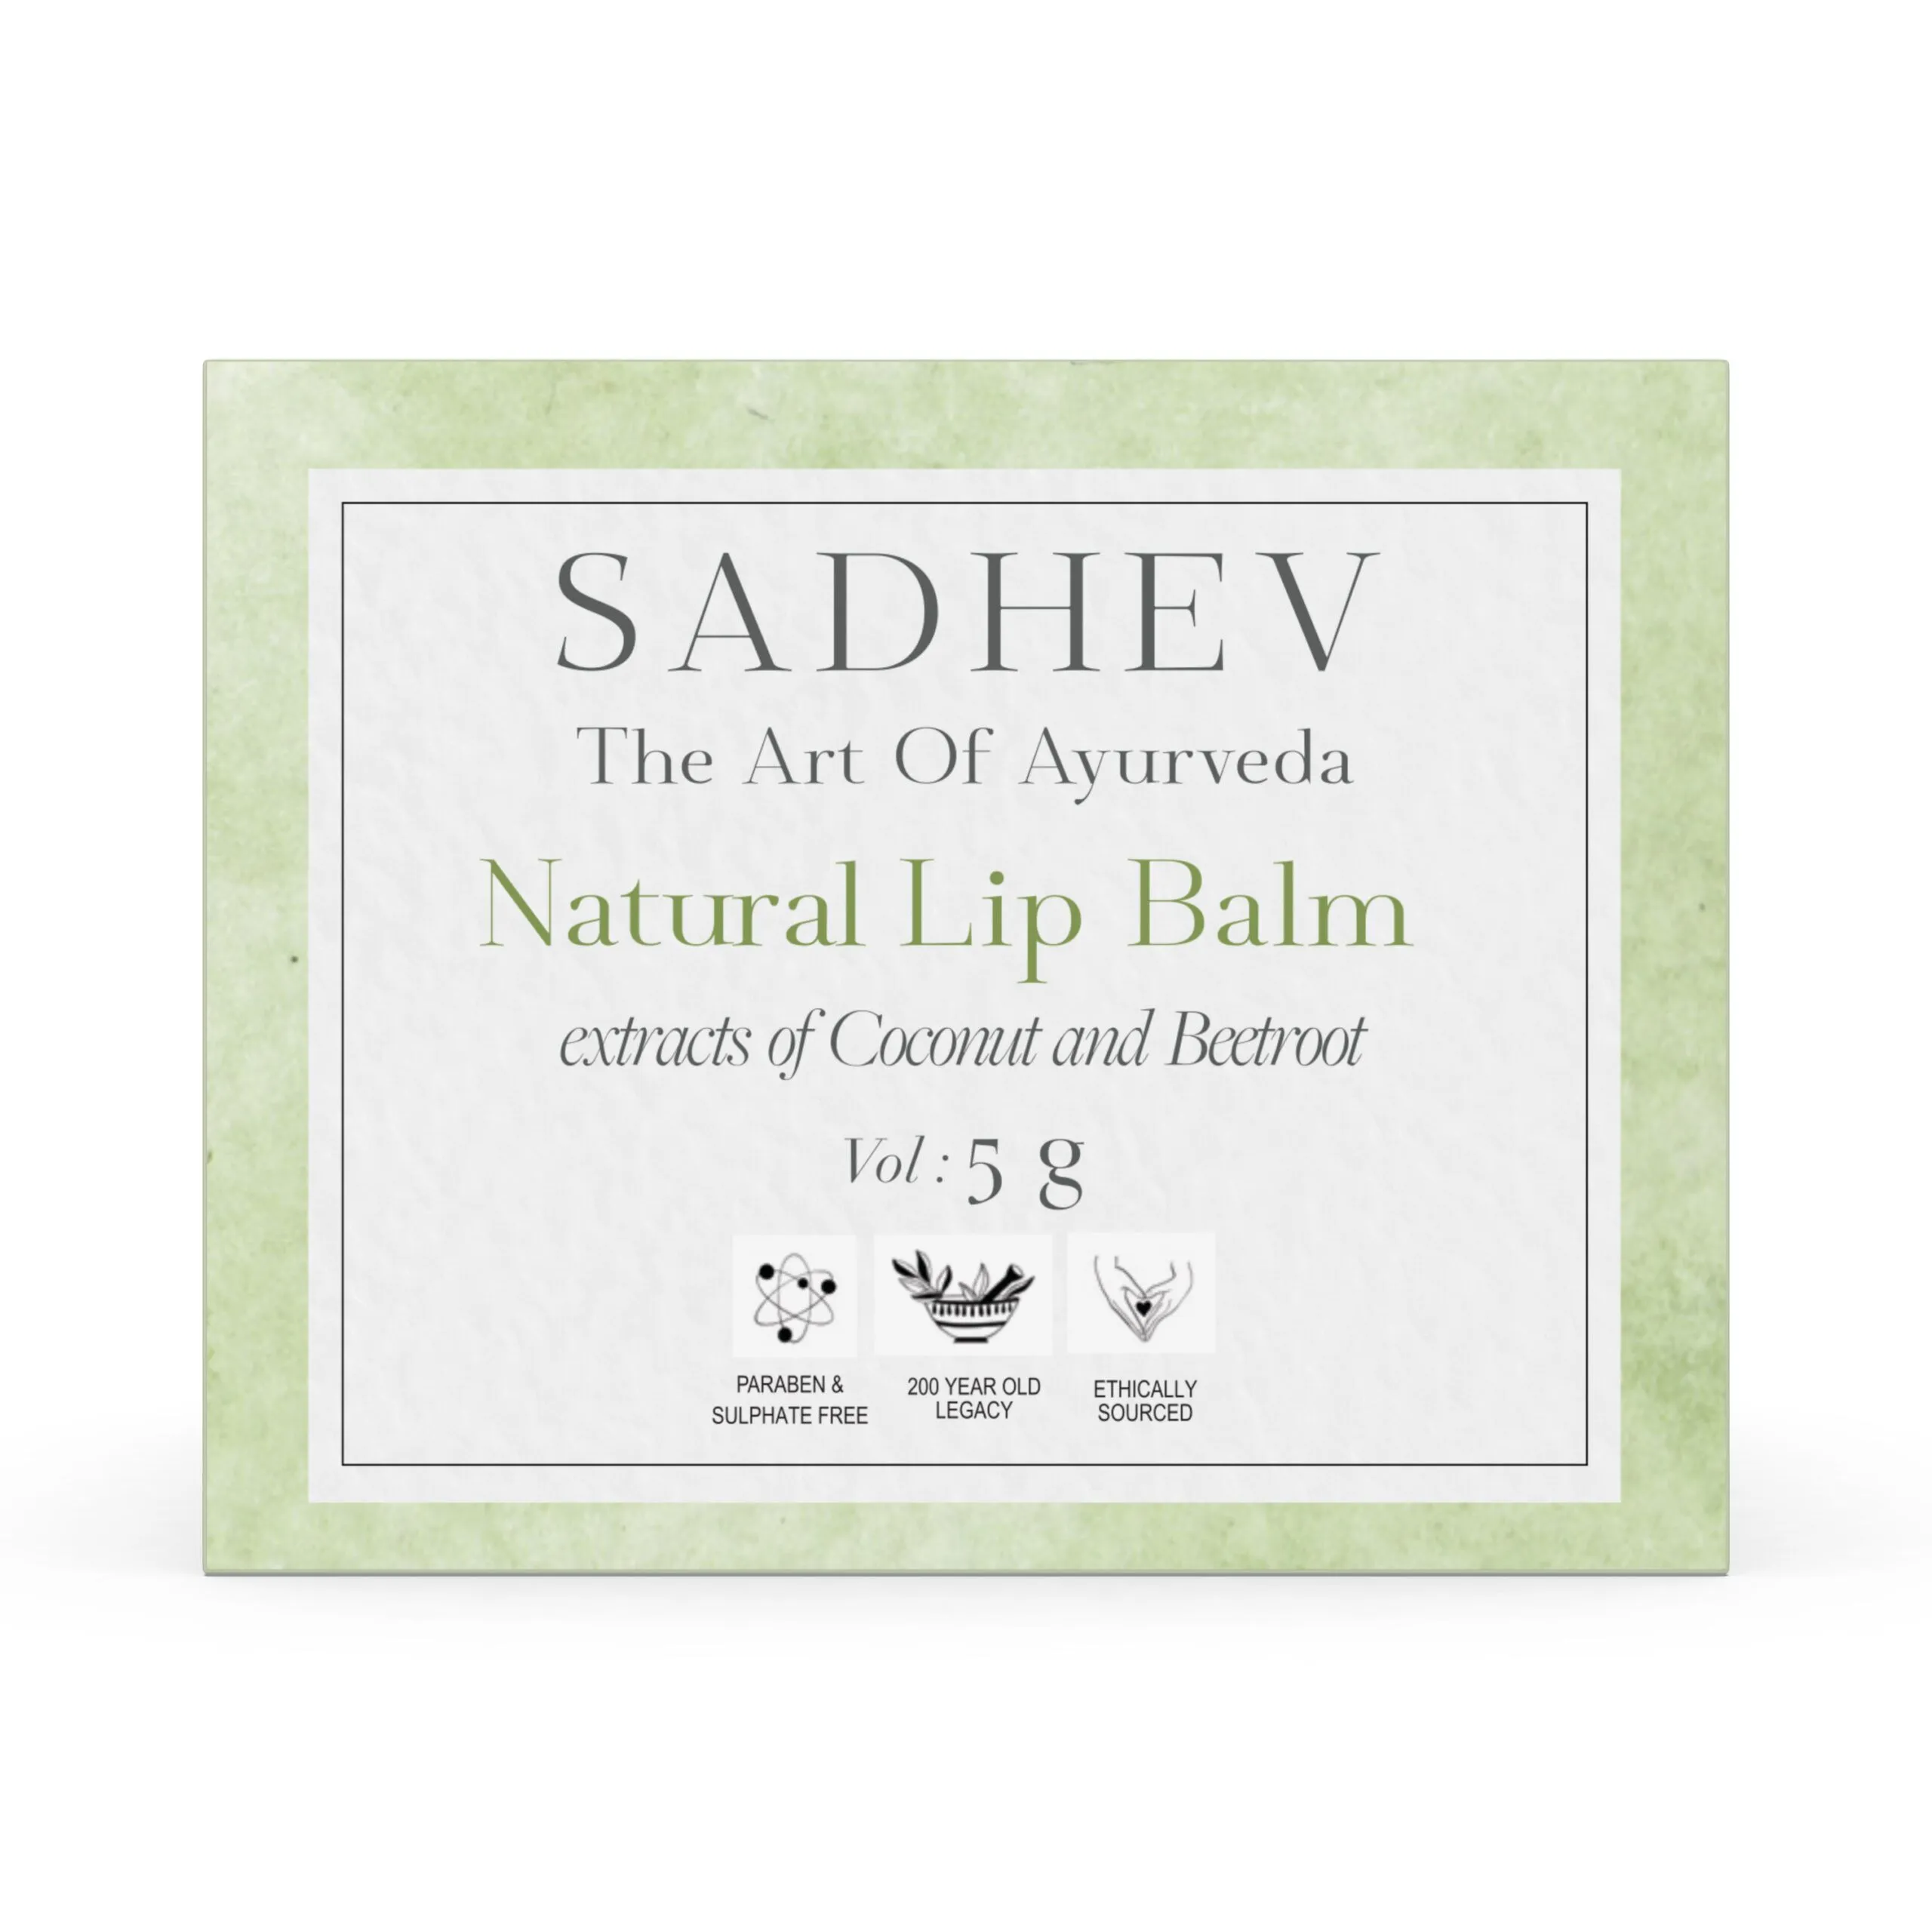 5 Surprising Uses for Natural Lip Balm Beyond Just Lip Care